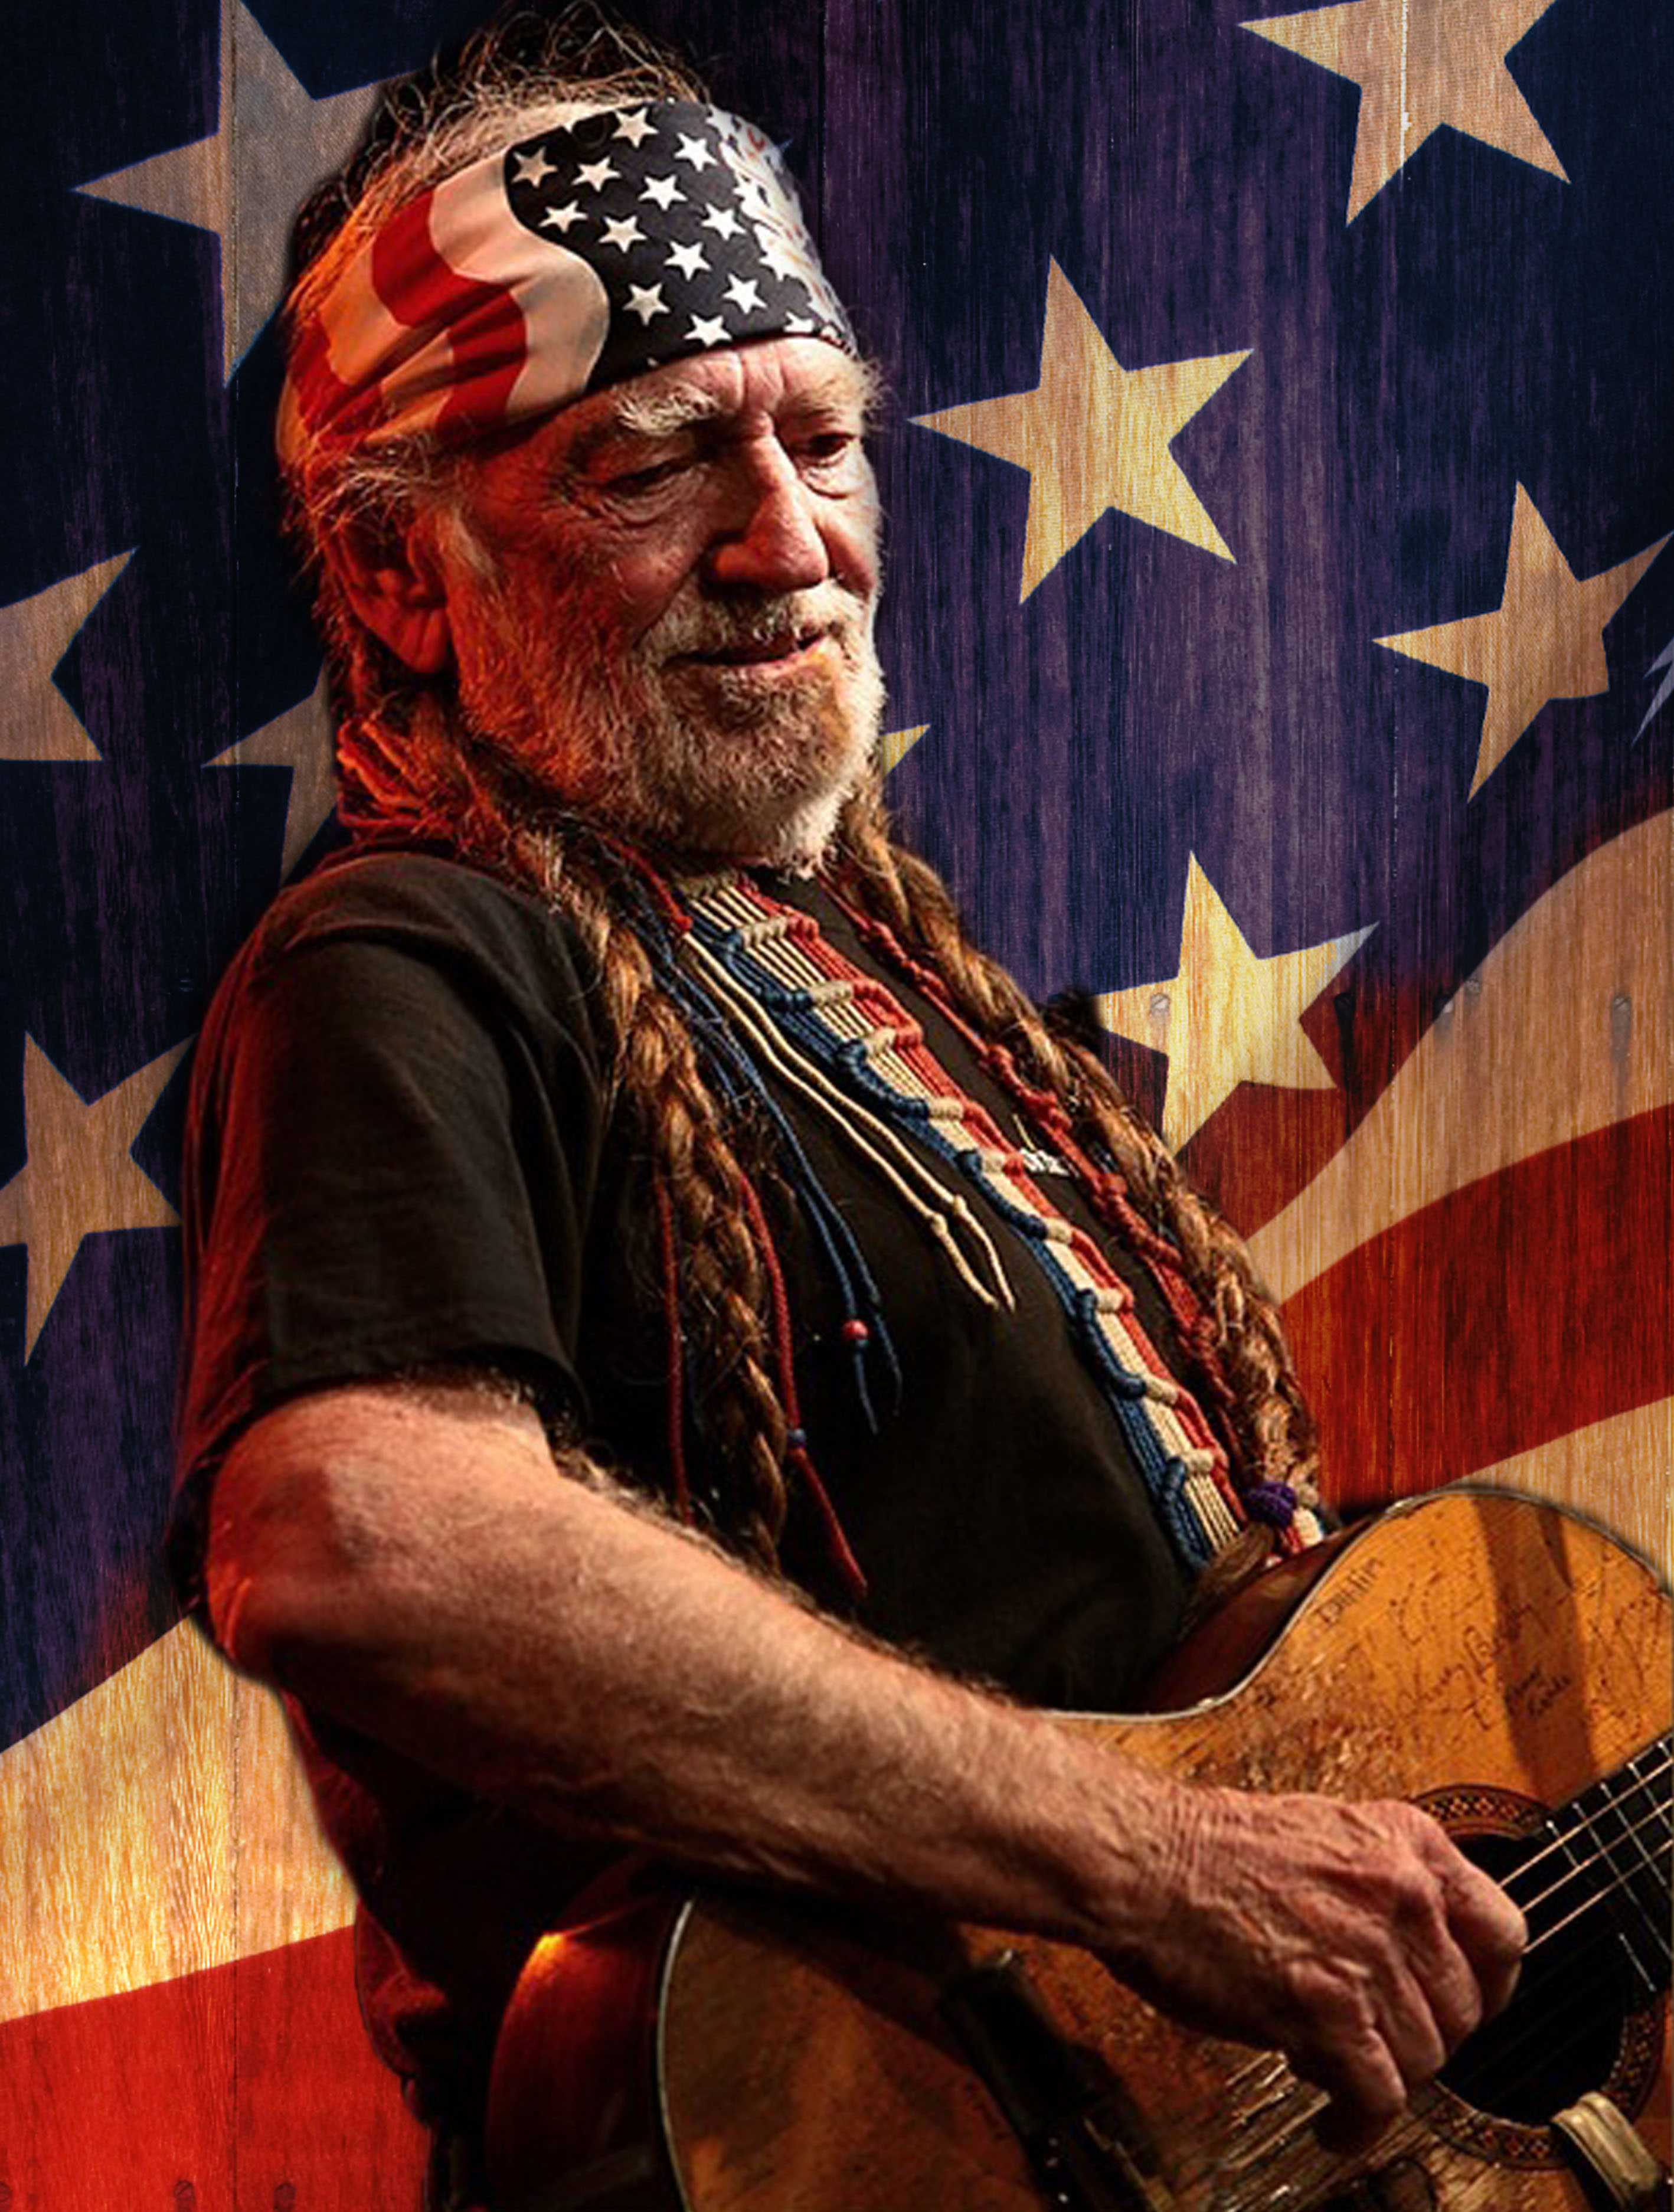 Willie Nelson Backgrounds, Compatible - PC, Mobile, Gadgets| 2836x3747 px